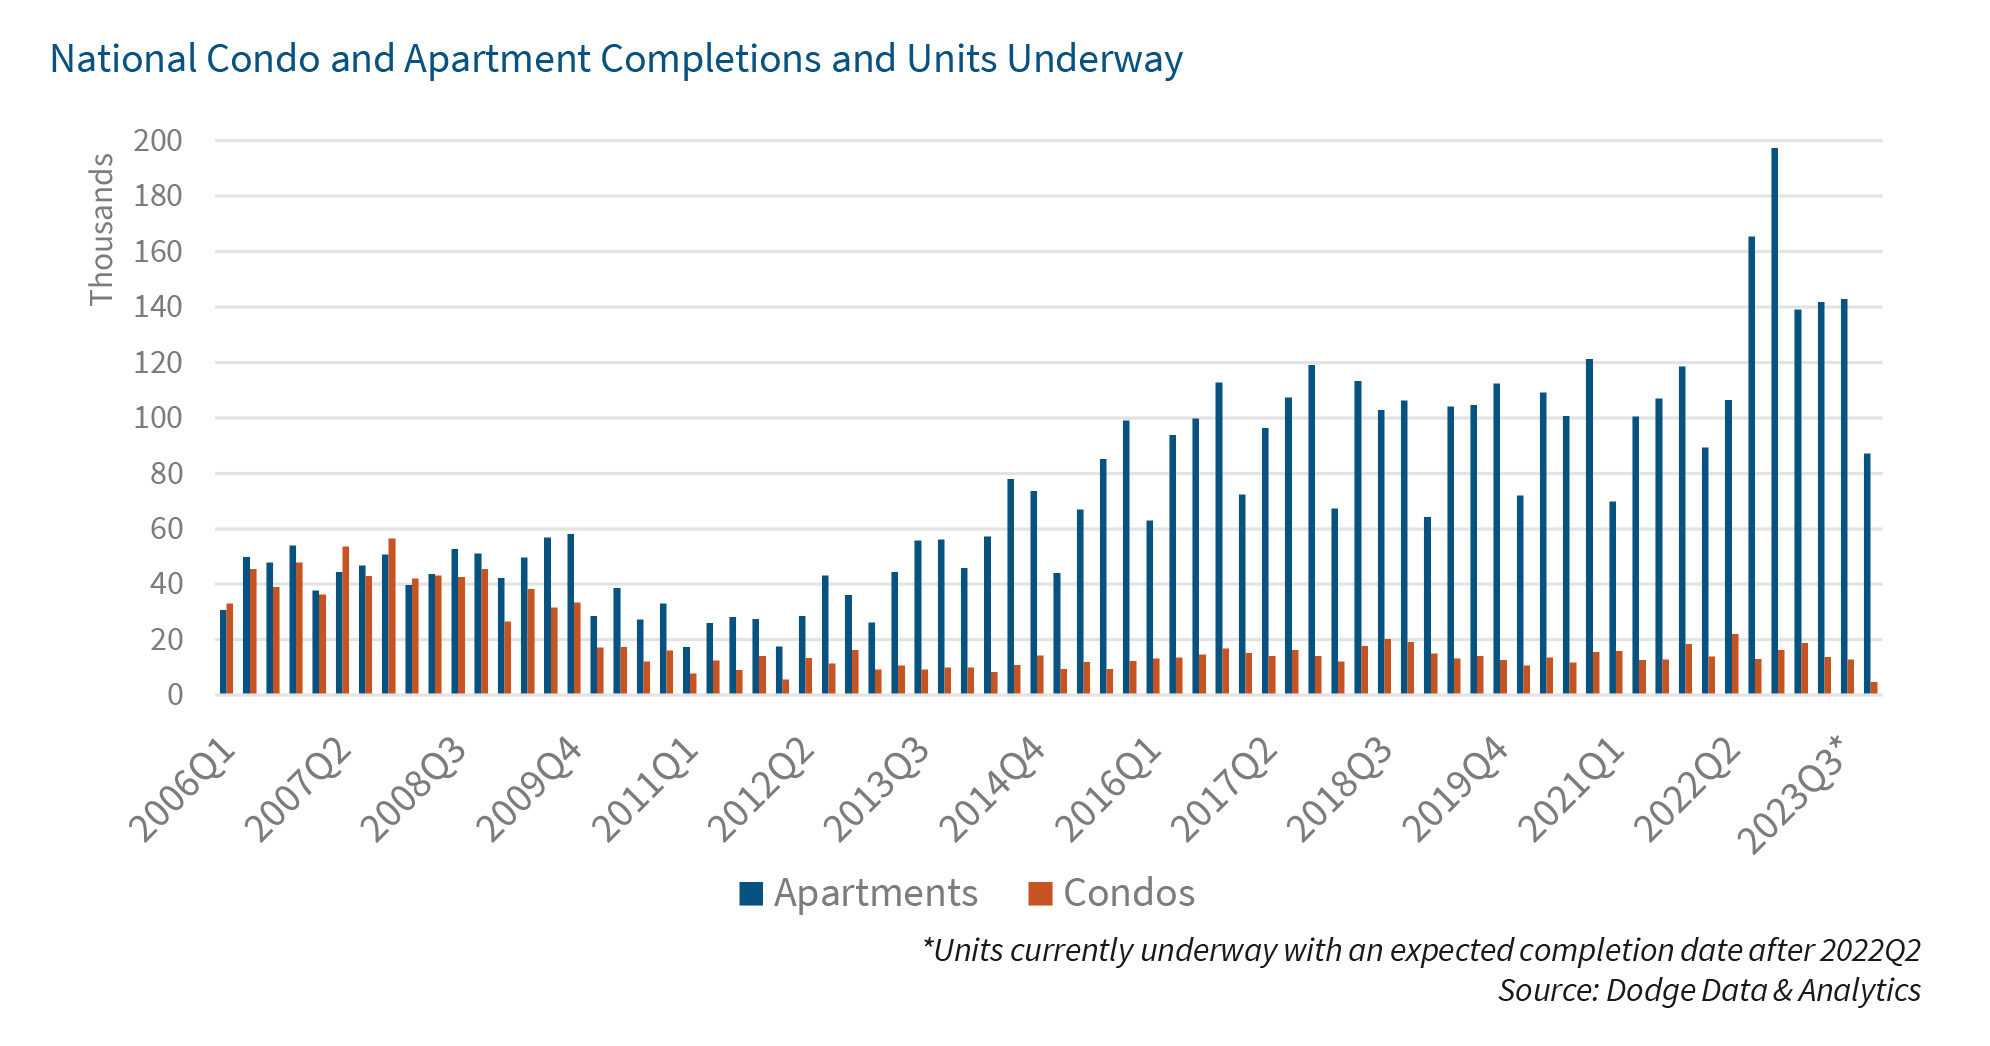 National Condo and Apartment Completions and Units Underway